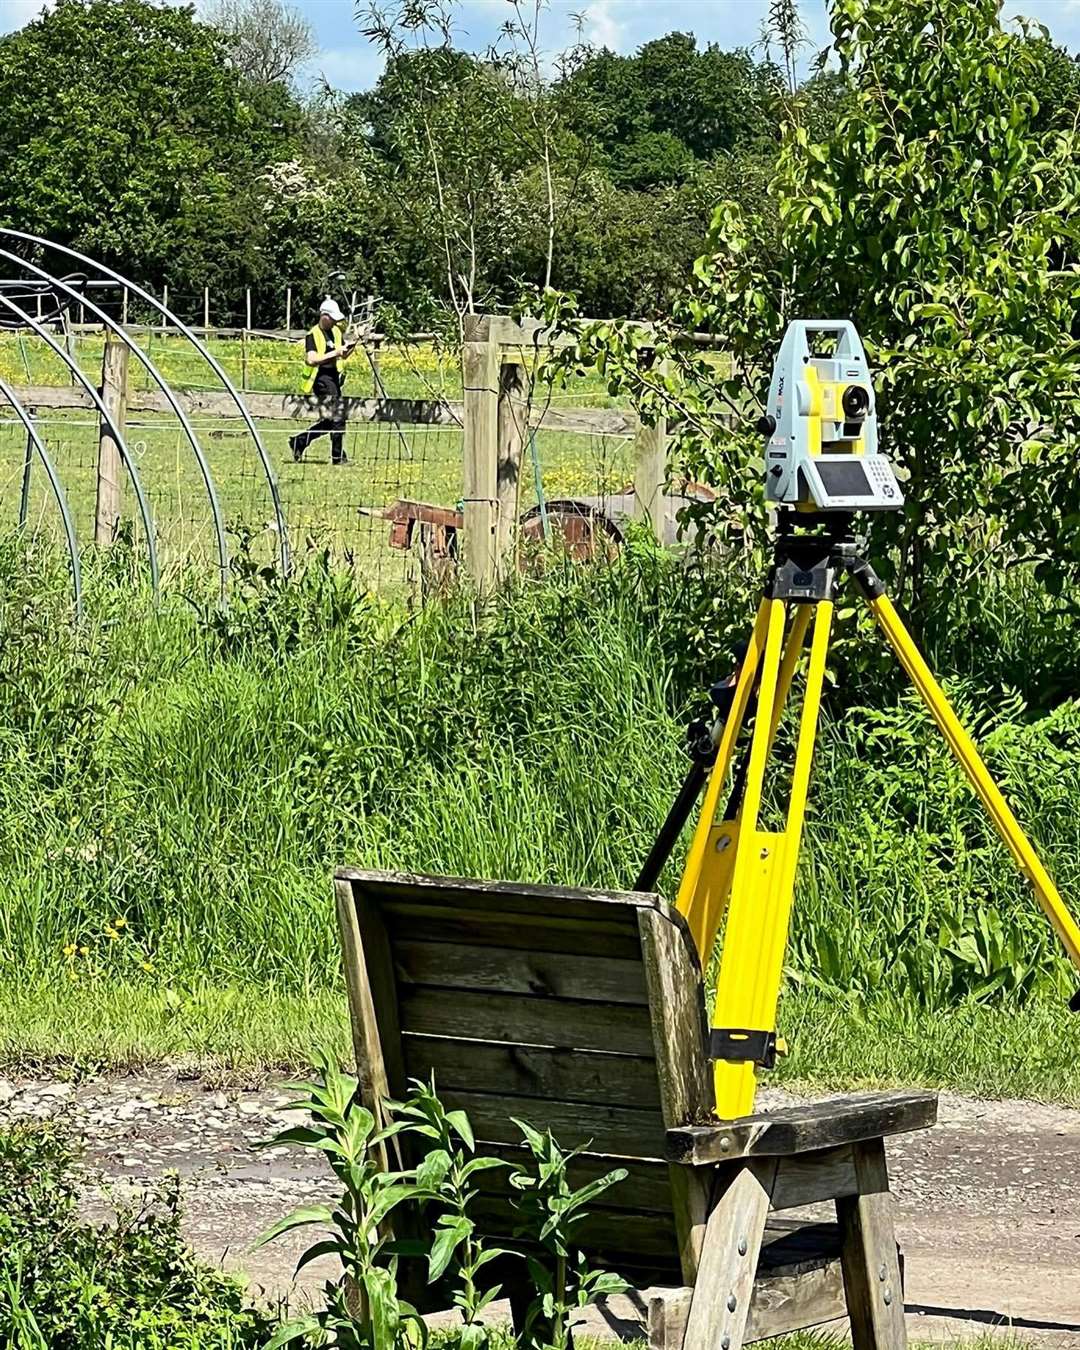 A topographical survey of the site has just been completed